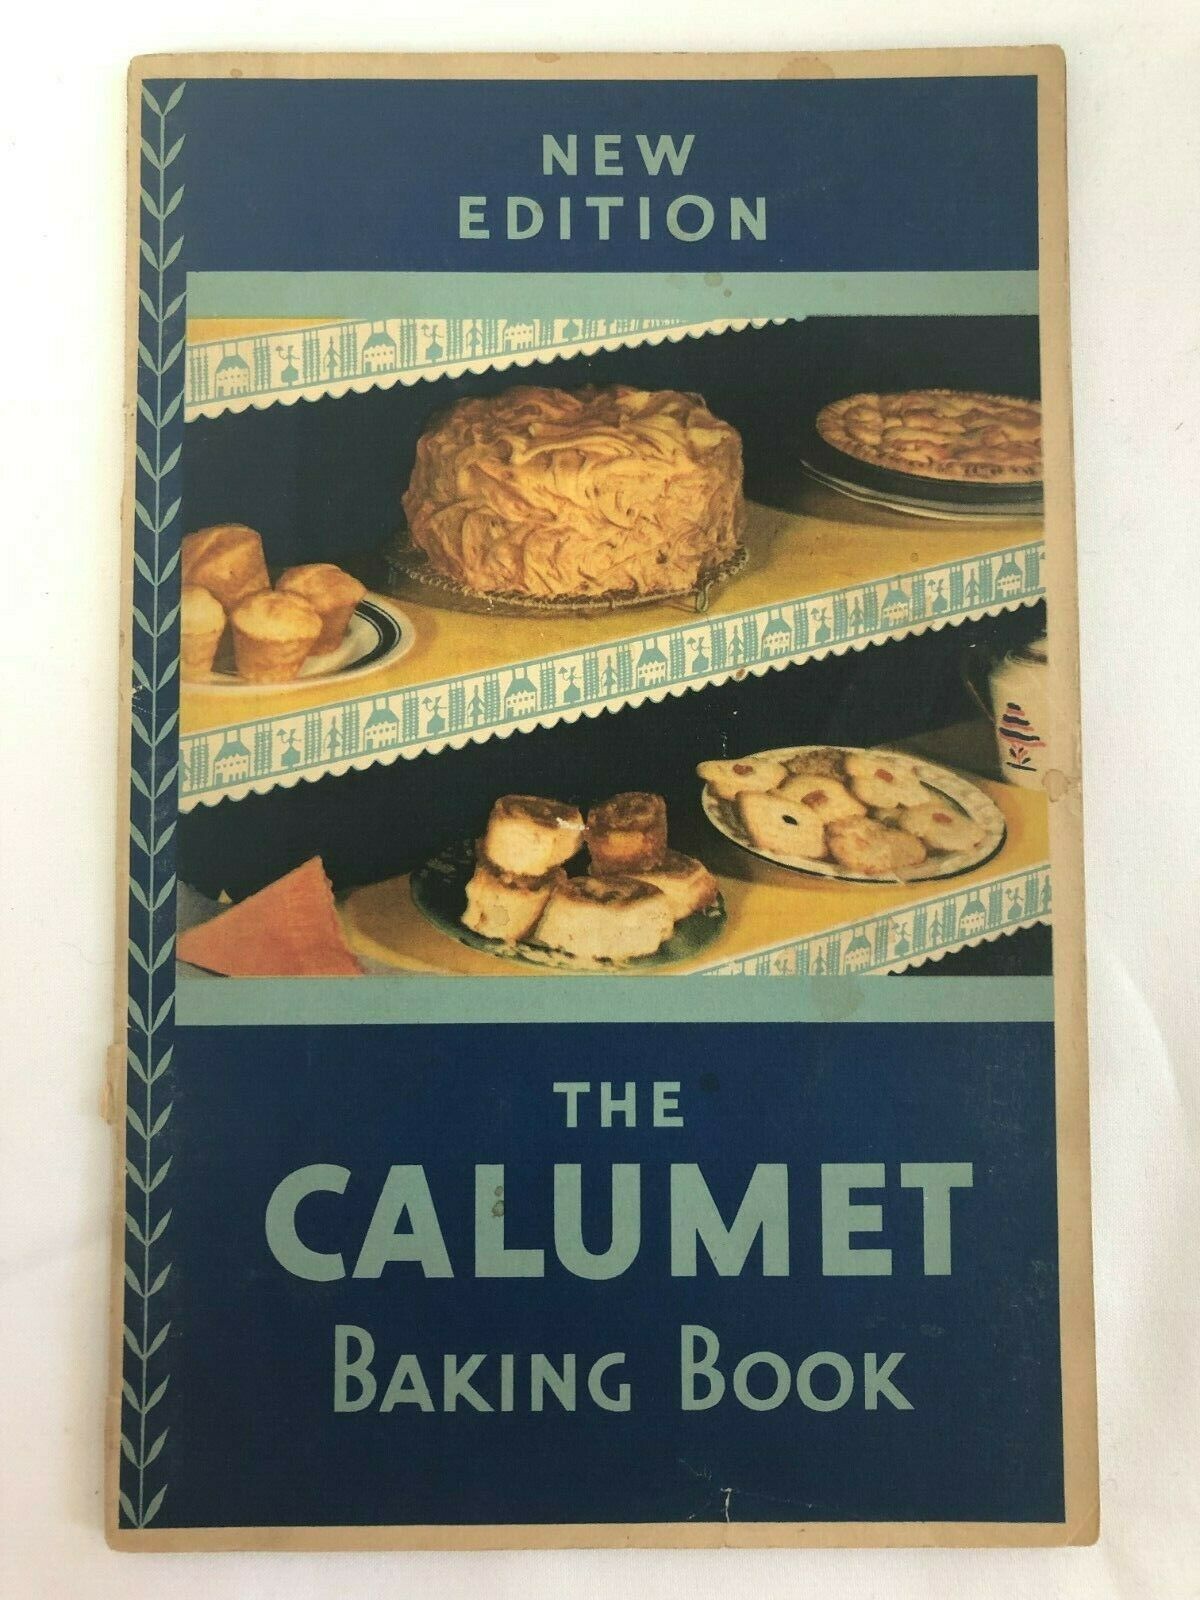 Vintage 1930 New Edition Calumet Baking Book, 31 Pages, Good Condition